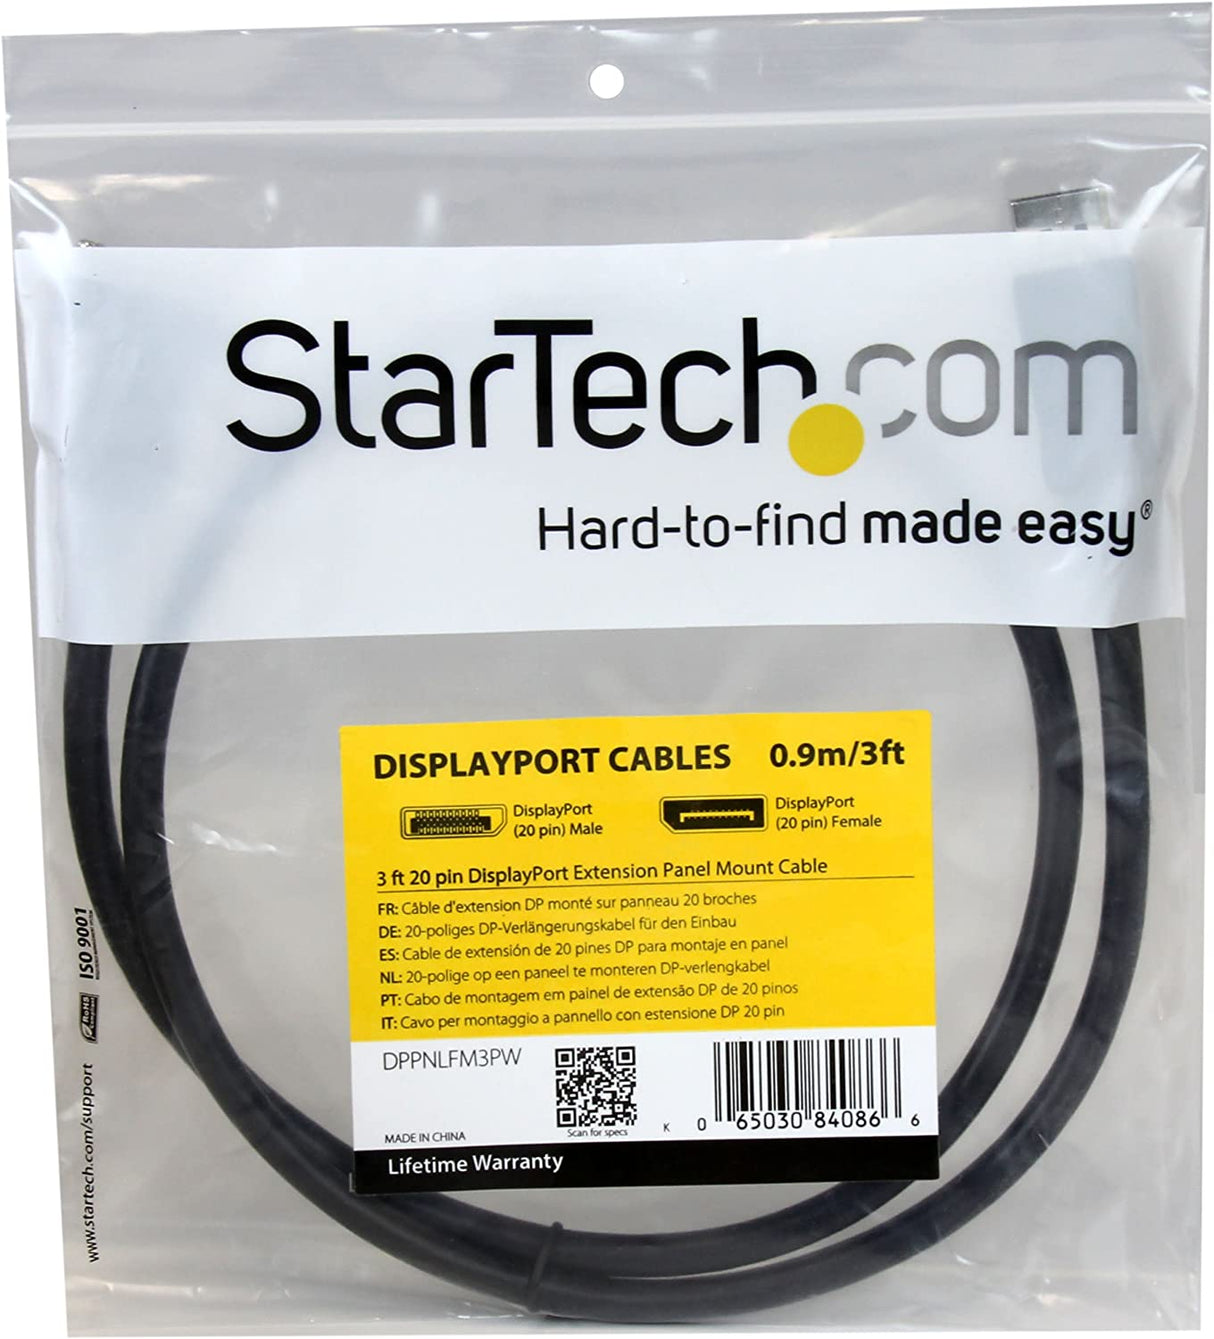 StarTech.com 3 ft / 91 cm 20 pin DP DisplayPort Extension Panel Mount Cable - DisplayPort to DisplayPort - Male to Female (DPPNLFM3PW) Power Delivery 3 ft / 1m